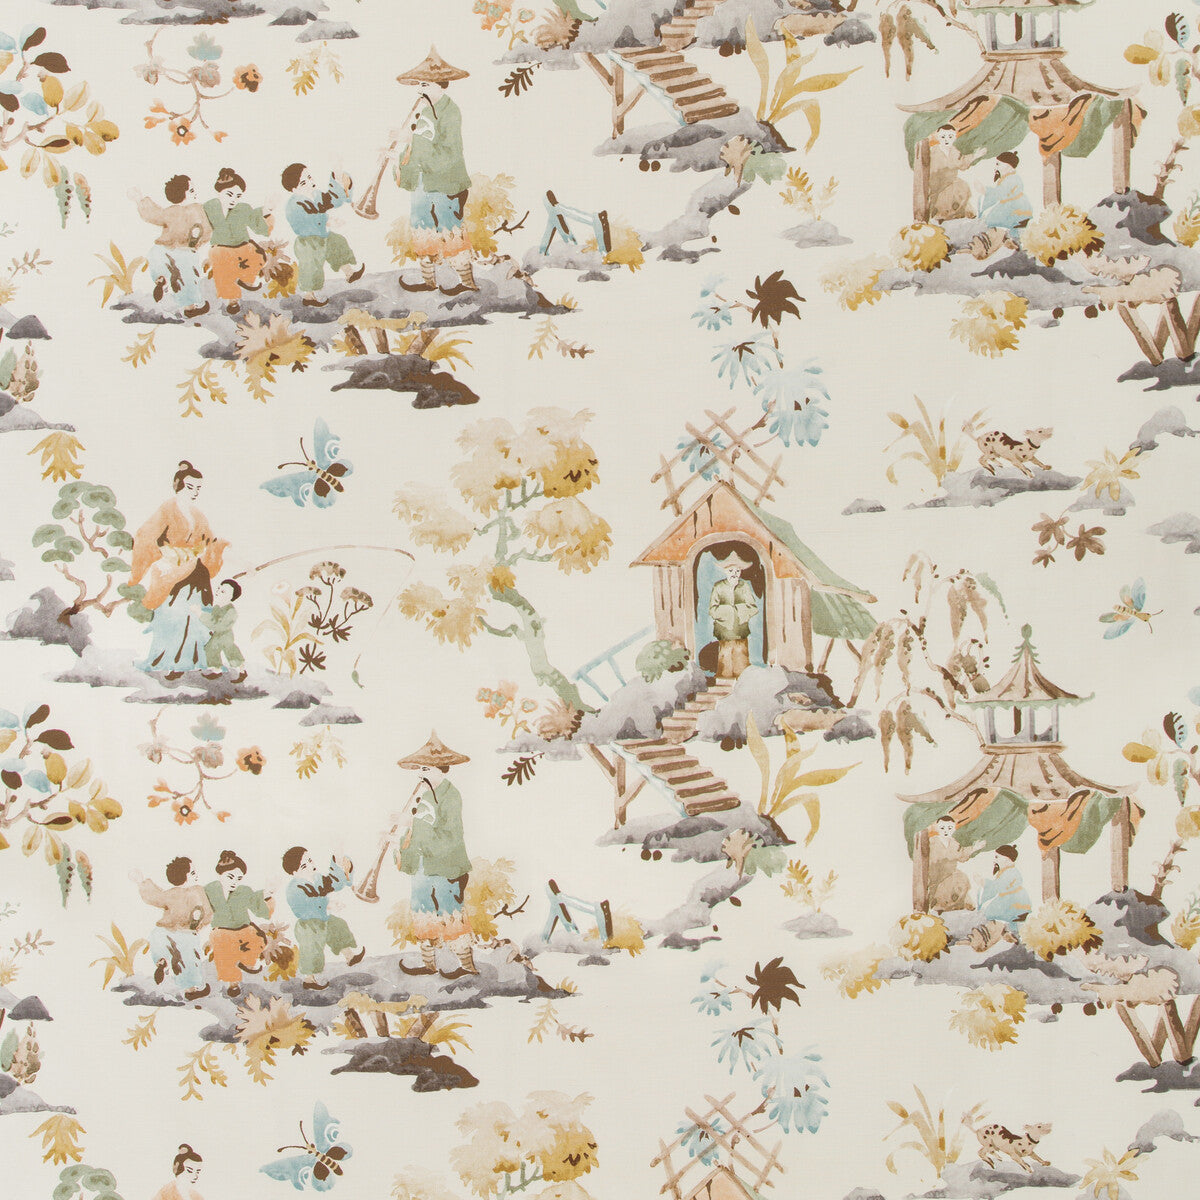 Luang Print fabric in cafe color - pattern 8019134.164.0 - by Brunschwig &amp; Fils in the Summer Palace collection